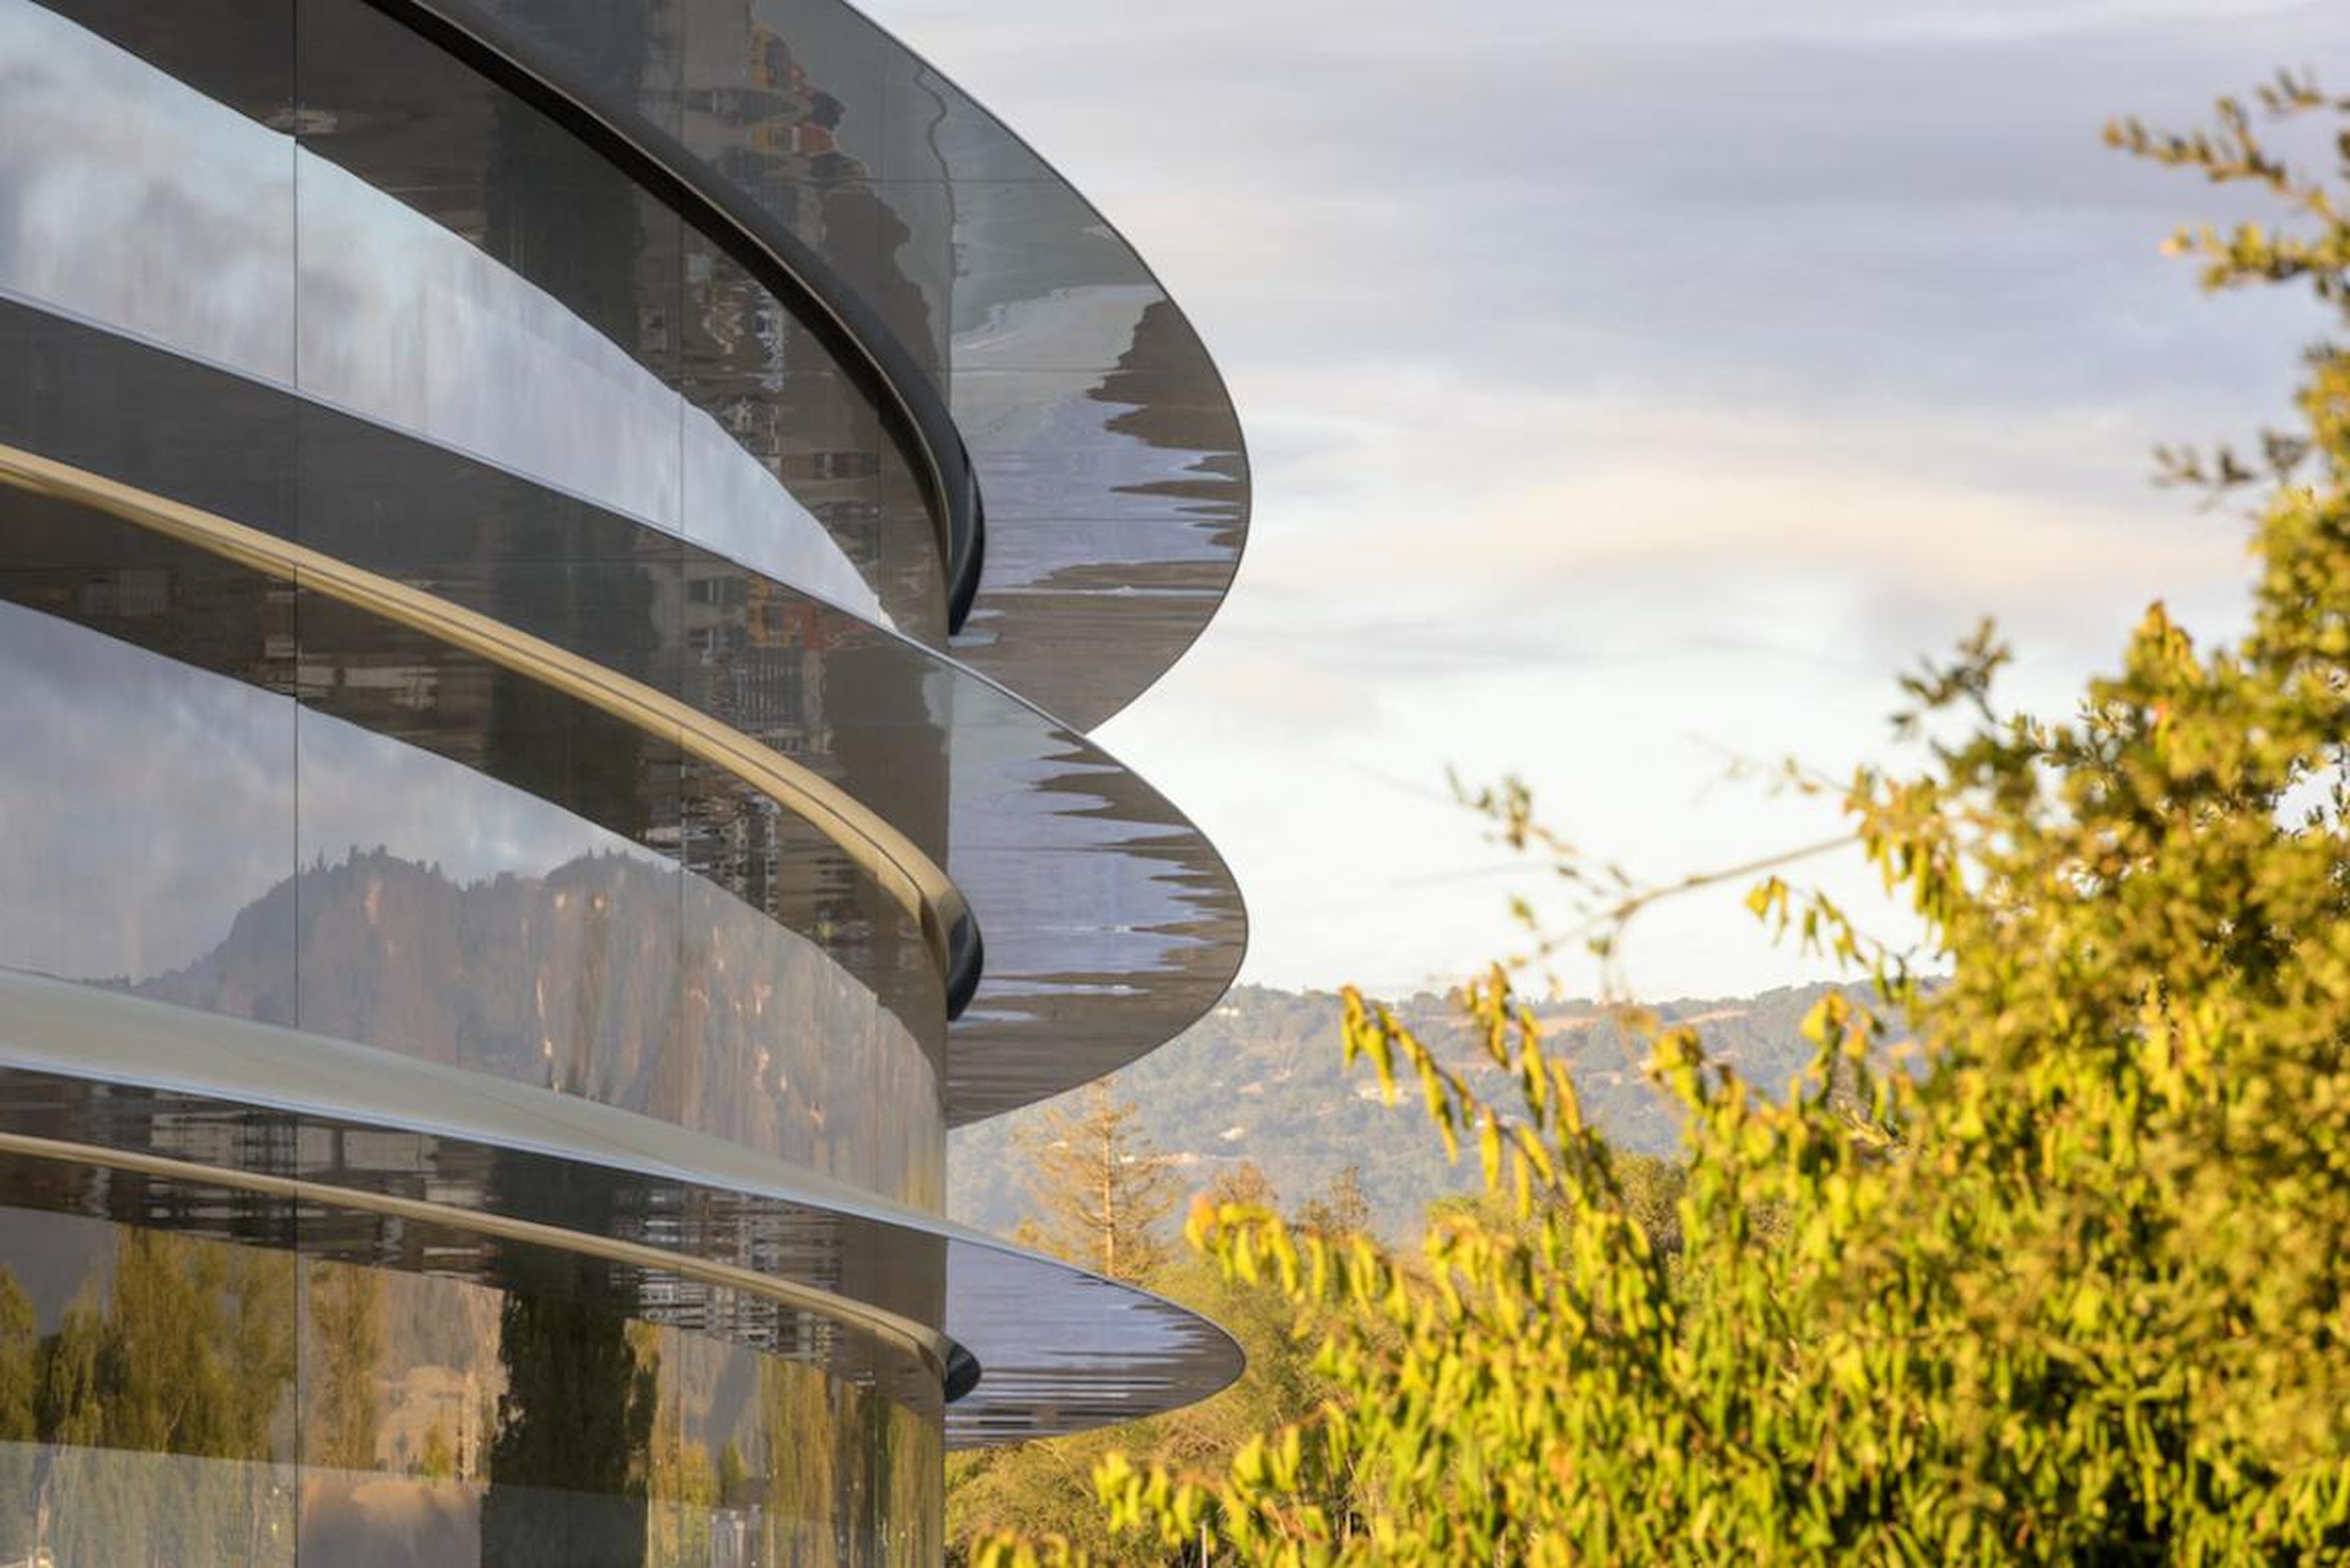 The way the glass canopies at Apple Park are slightly curved to deflect rain: